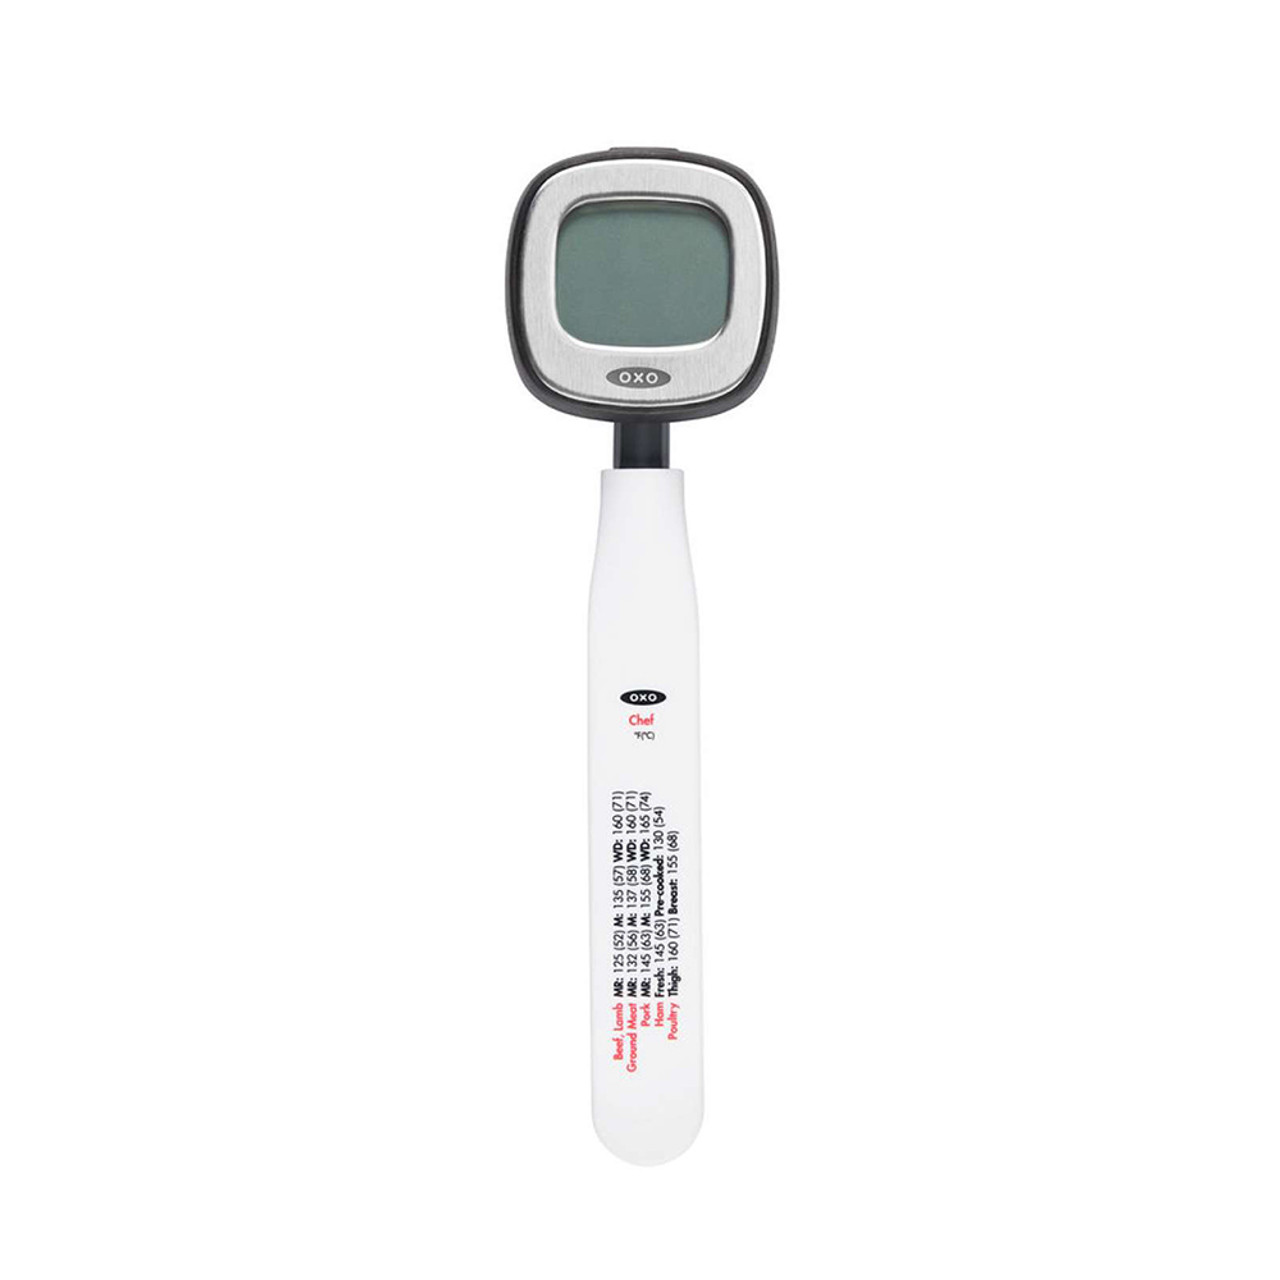 OXO Thermocouple Oven Digital Meat Thermometer & Reviews